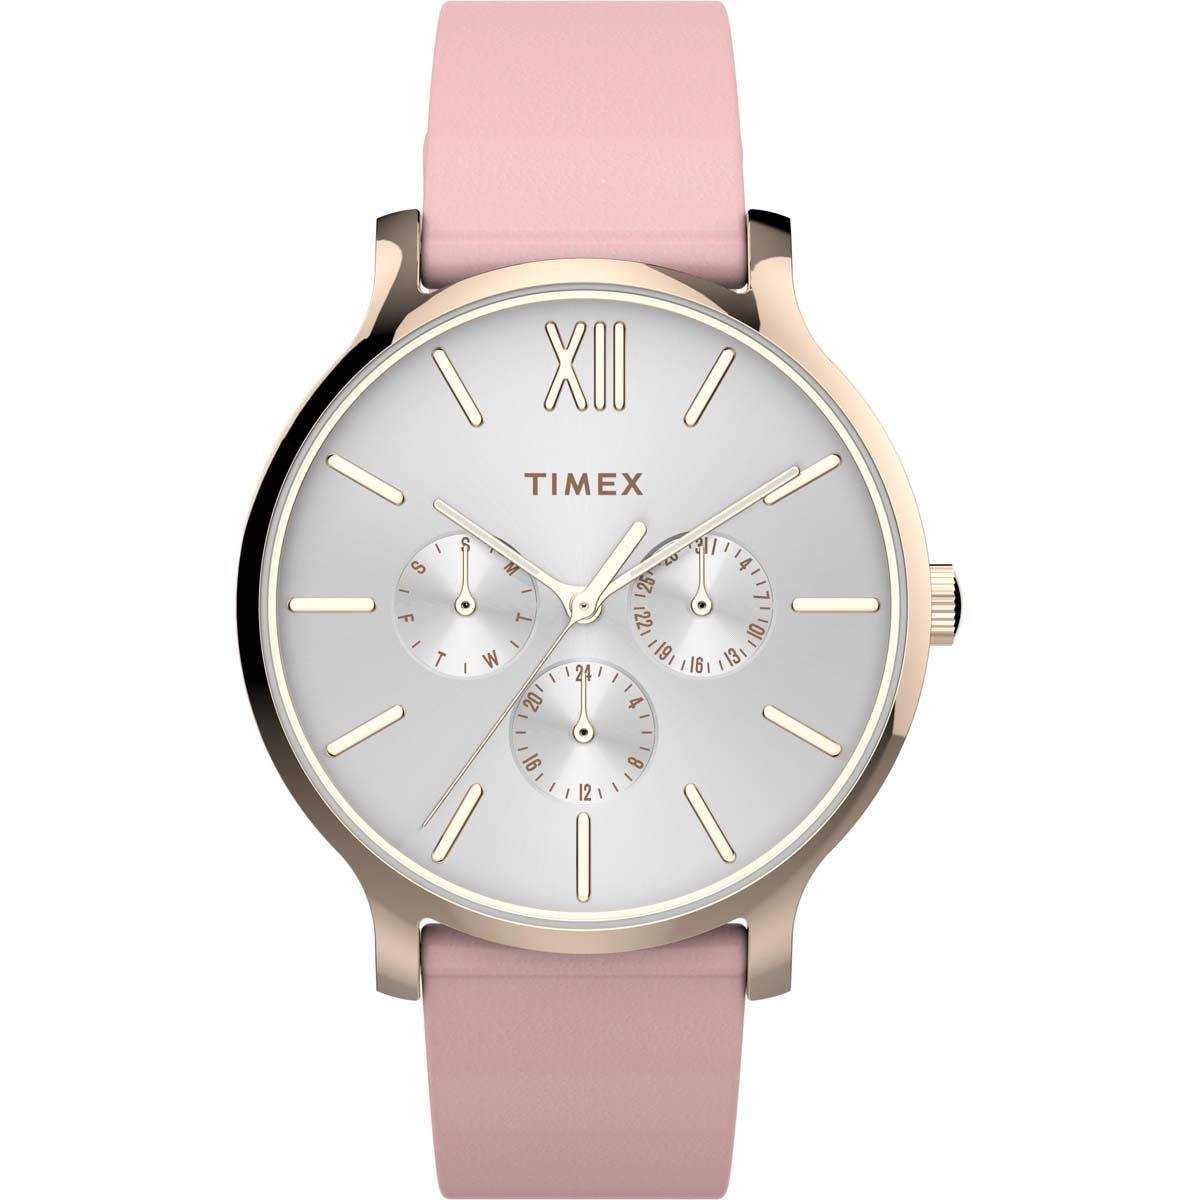 This Timex Transcend Multi Dial Watch for Women is the perfect timepiece to wear or to gift. It's Gold 38 mm Round case combined with the comfortable Pink Leather watch band will ensure you enjoy this stunning timepiece without any compromise. Operated by a high quality Quartz movement and water resistant to 5 bars, your watch will keep ticking. This watch is great with both casual and dressy wear, this watch will always attract attention to your wrist! -The watch has a calendar function: Day-Date, Luminous Hands, 24-hour Display High quality 19 cm length and 17 mm width Pink Leather strap with a Buckle Case diameter: 38 mm,case thickness: 9 mm, case colour: Gold and dial colour: Silver